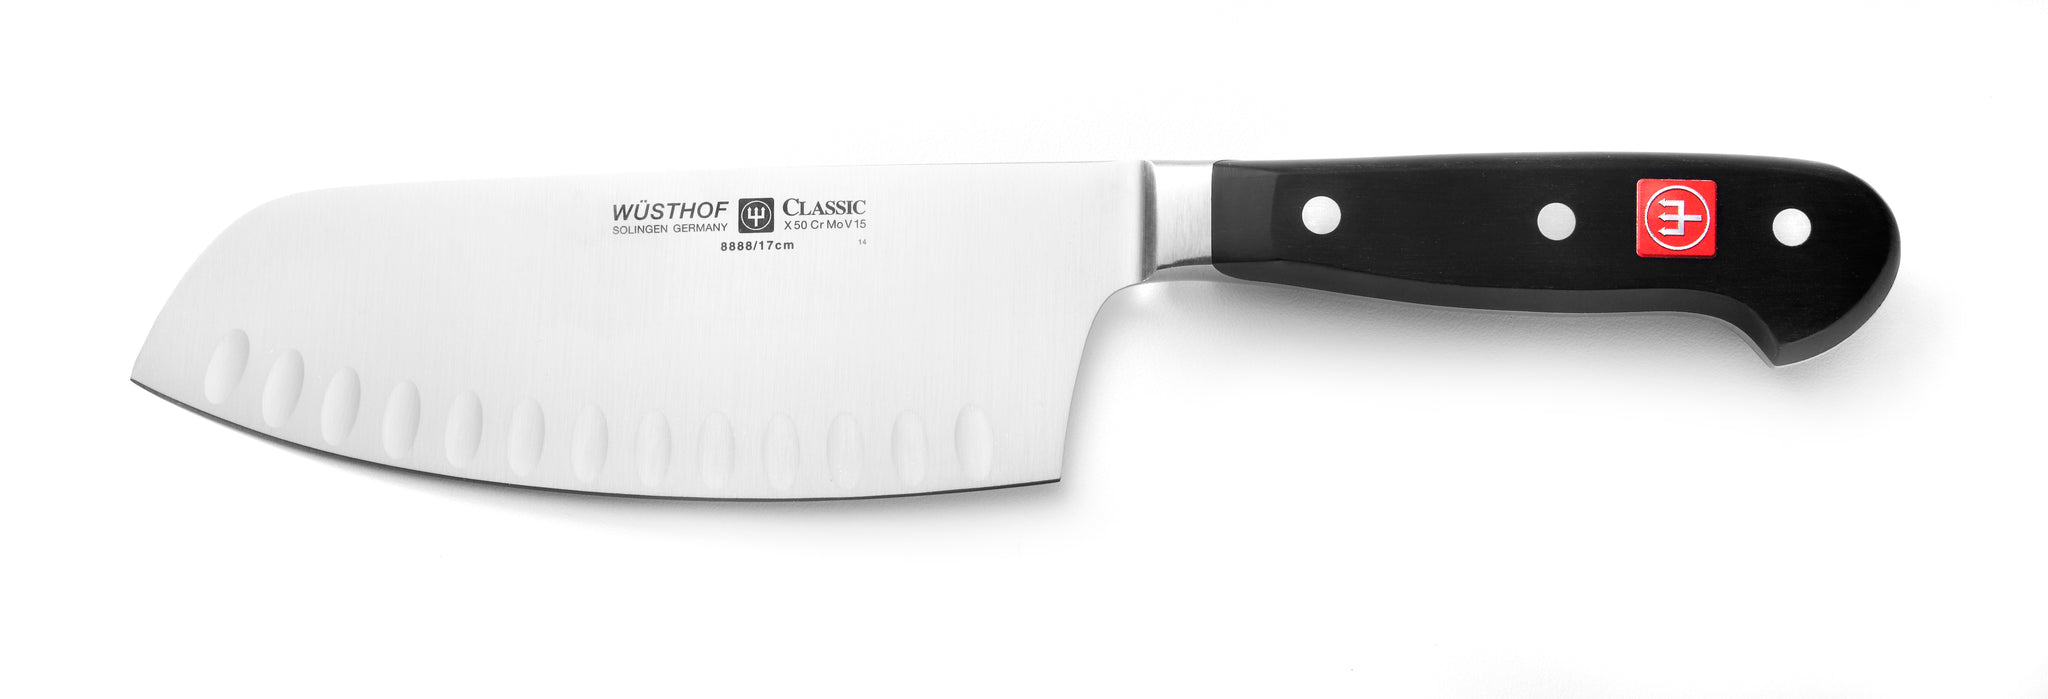 8888-7 wusthof classic hollow edge chai dao. 7 inches. riveted handle.